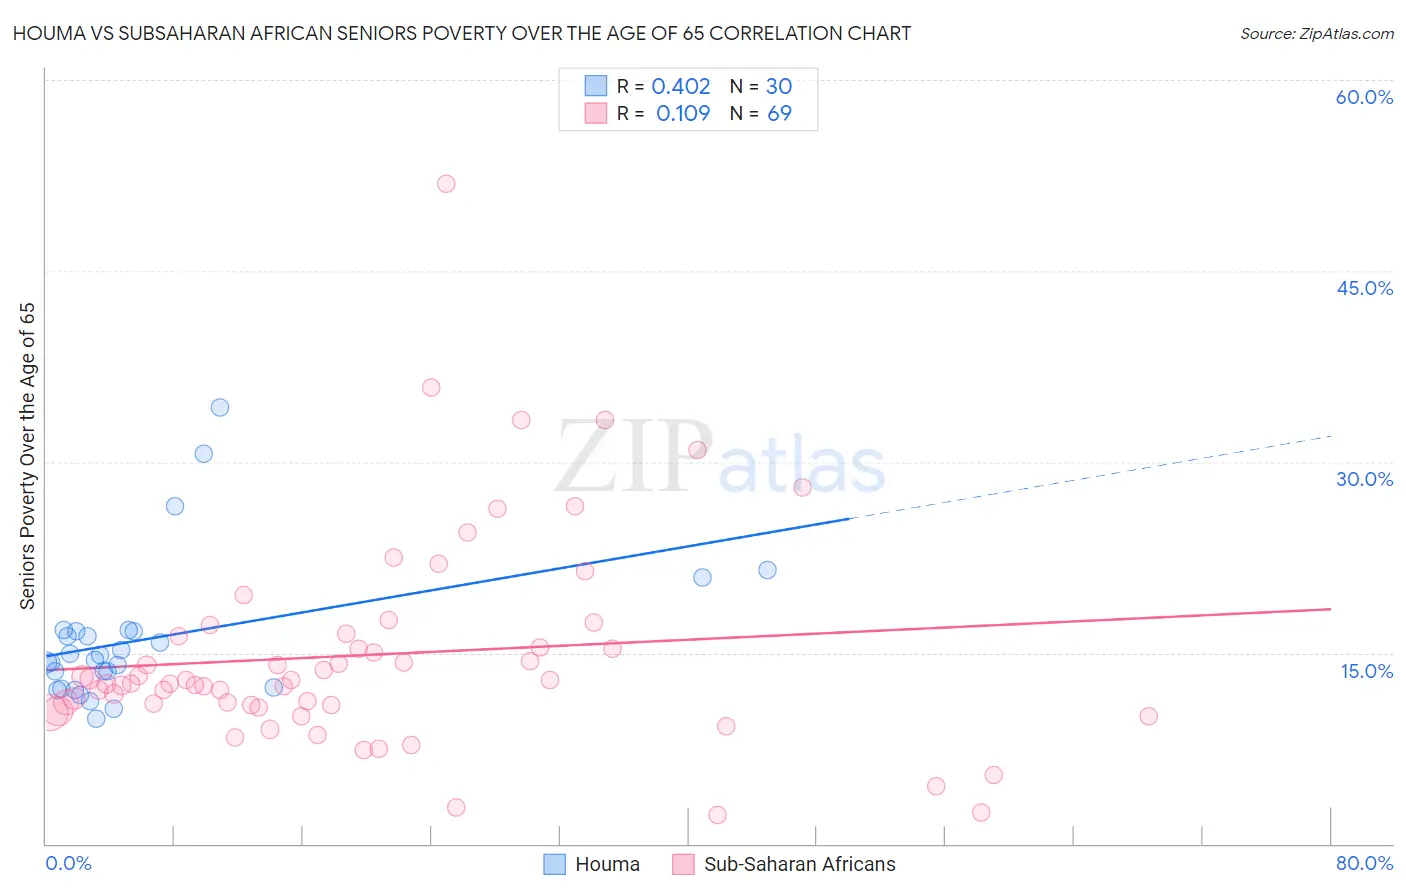 Houma vs Subsaharan African Seniors Poverty Over the Age of 65